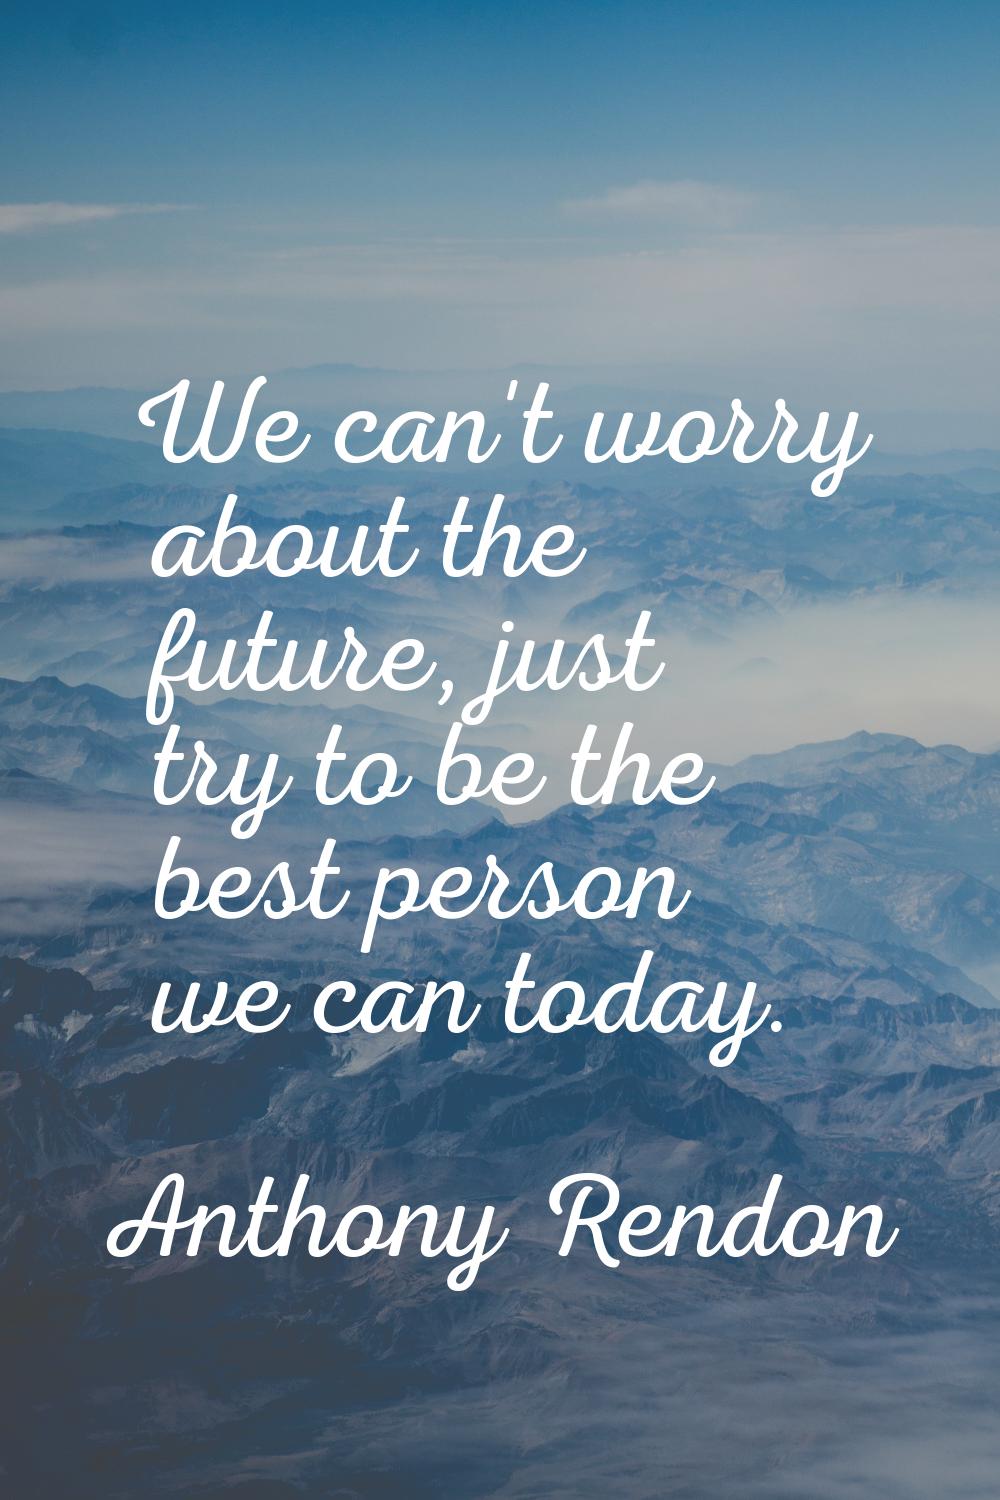 We can't worry about the future, just try to be the best person we can today.